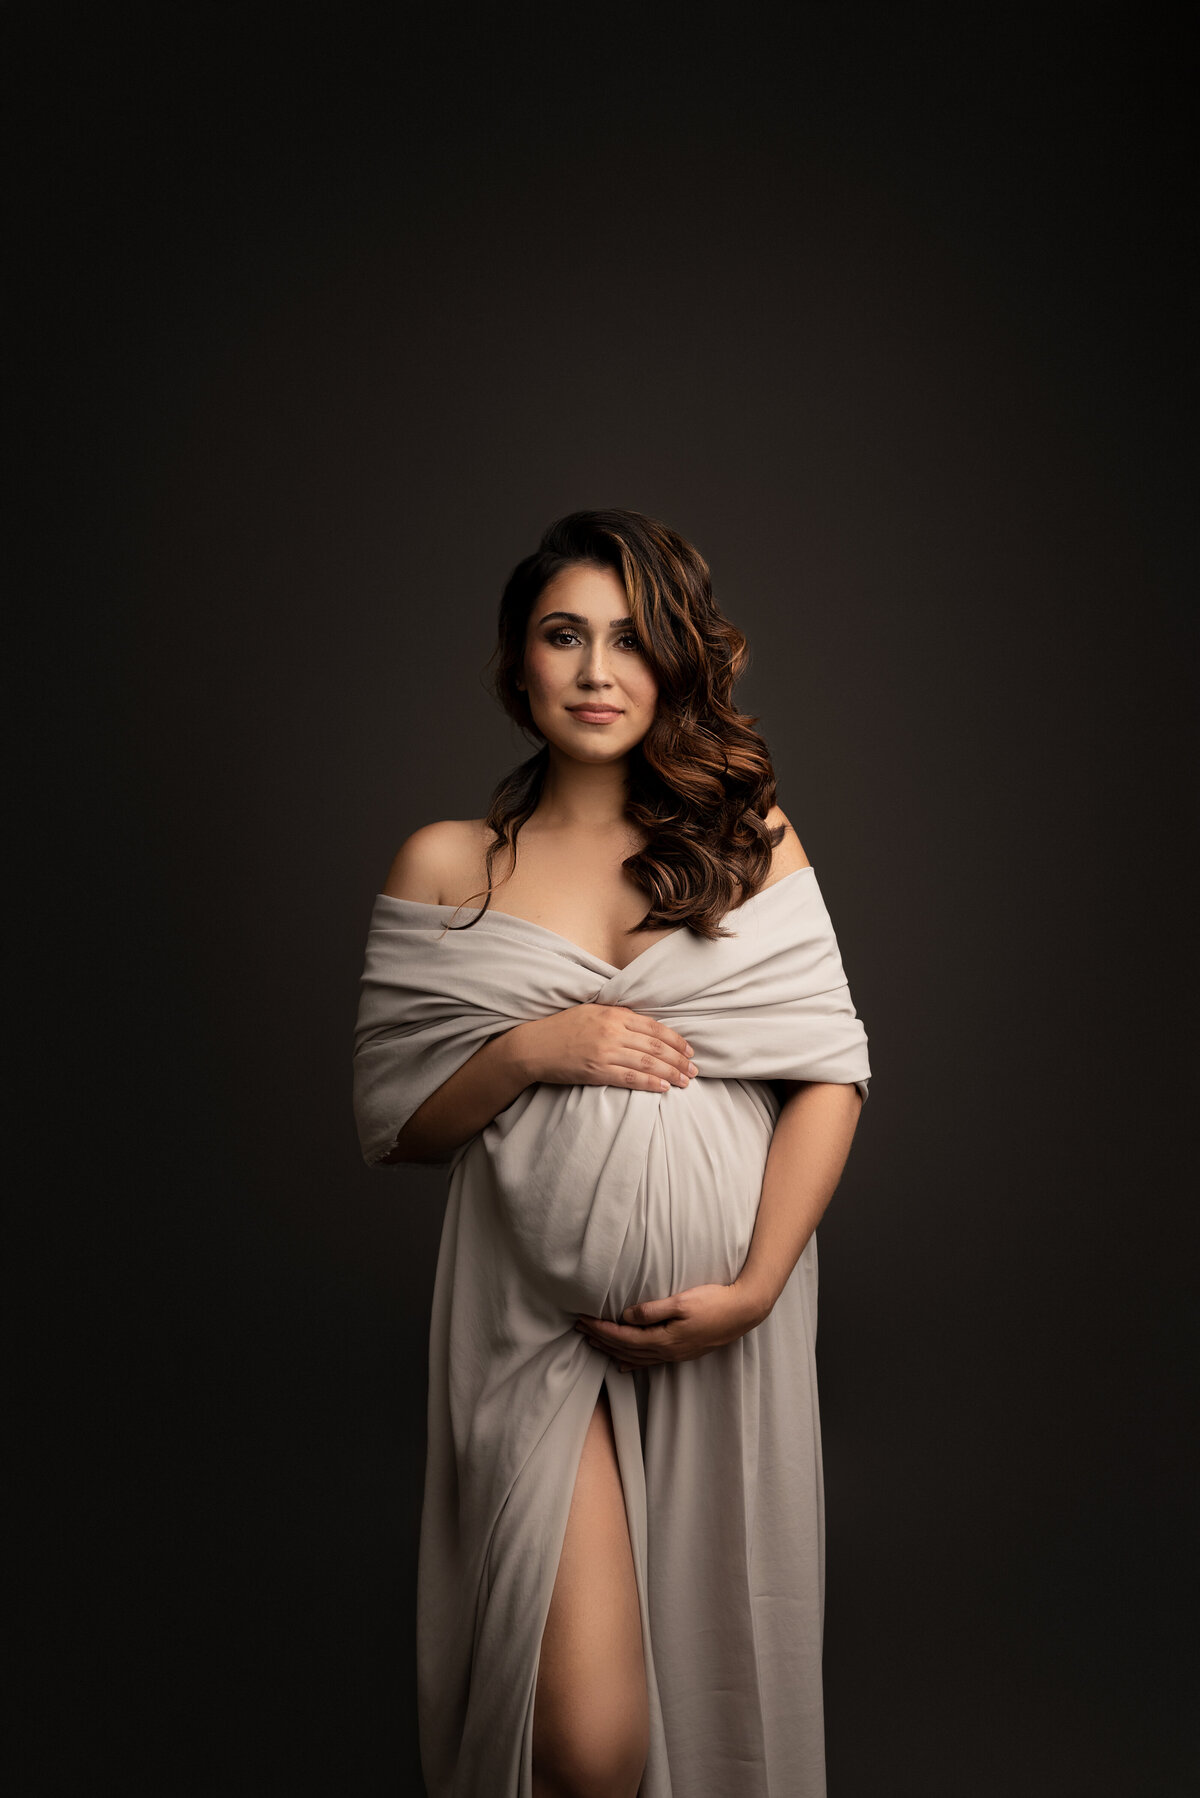 In this captivating photograph, Katie Marshall, the renowned Main Line maternity photographer, skillfully captures the essence of an expectant mom. The radiant mother stands gracefully, facing the camera, donned in an elegant linen-colored off-the-shoulder dress. Her flowing reddish-brown curls cascade gently over her shoulder, framing her serene expression as she gazes directly into the camera, her smile exuding warmth and anticipation.